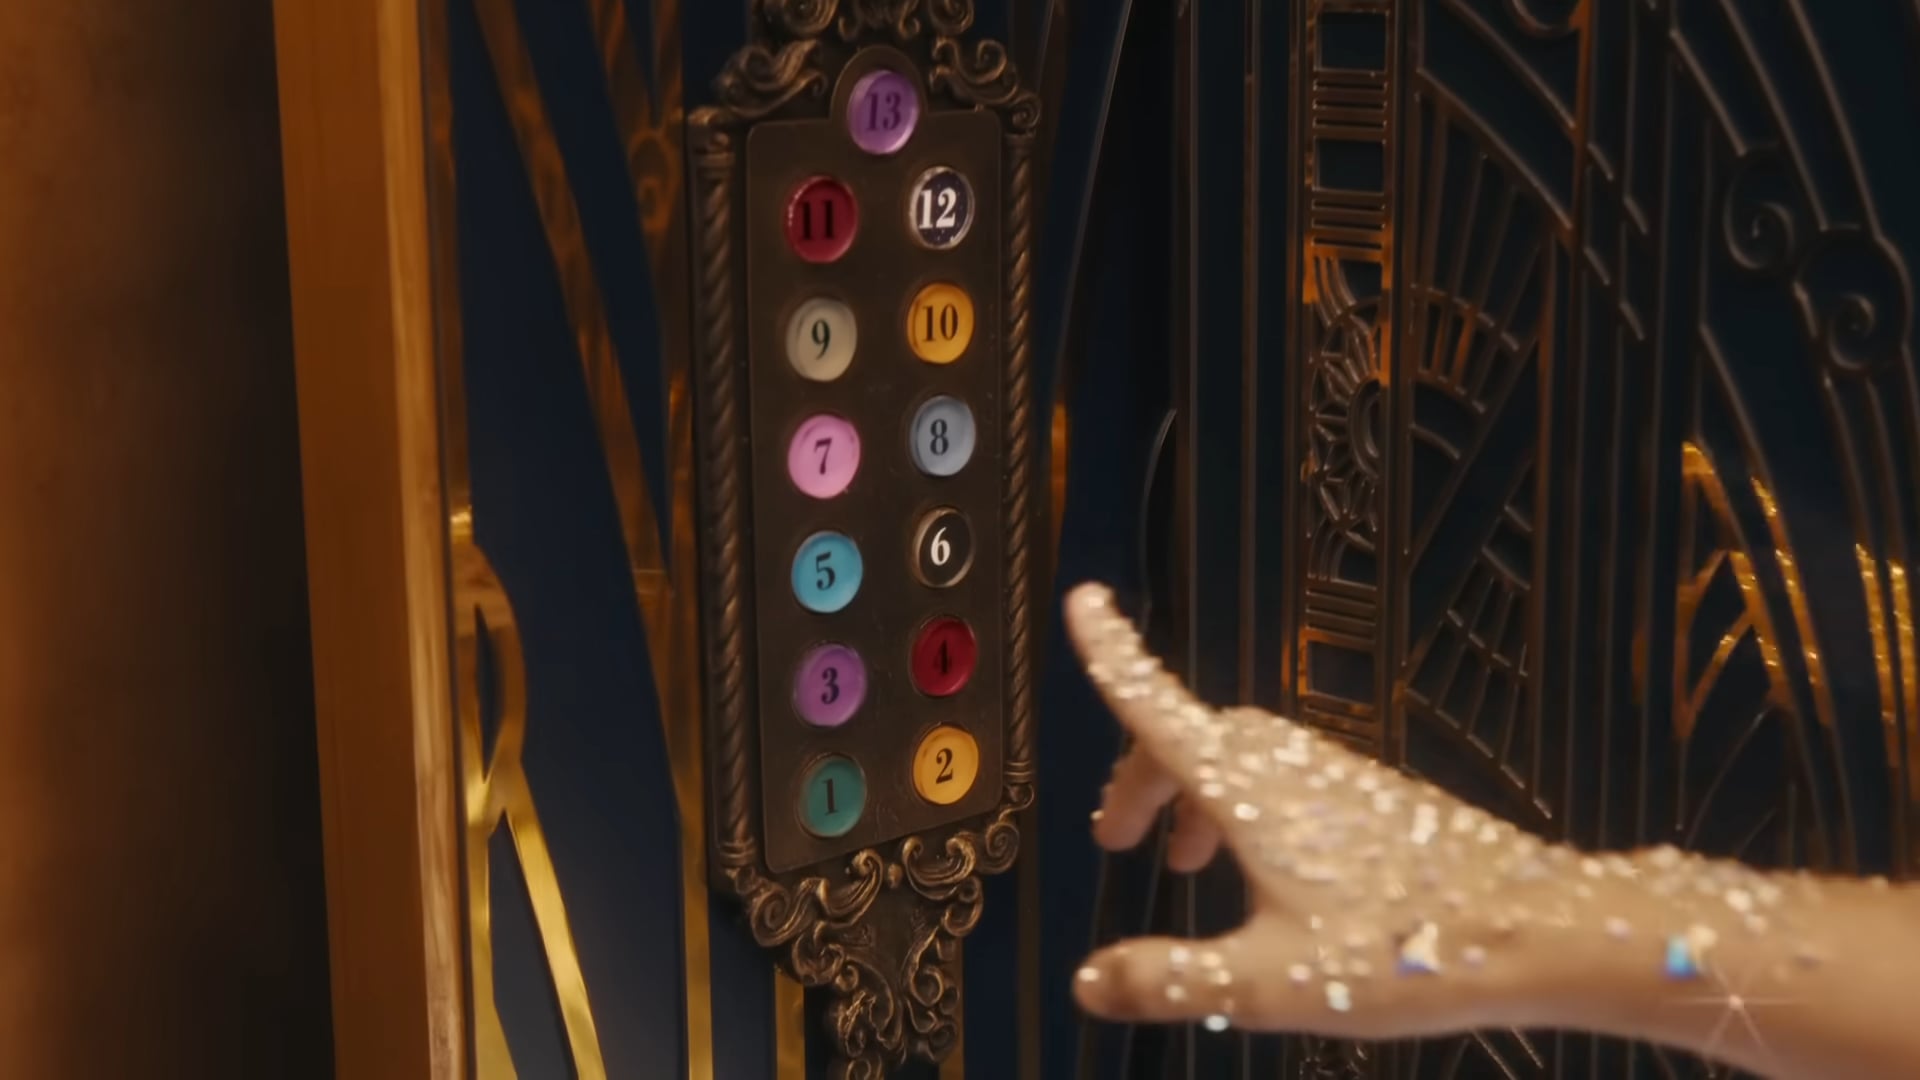 Elevator buttons in the Bejeweled Video